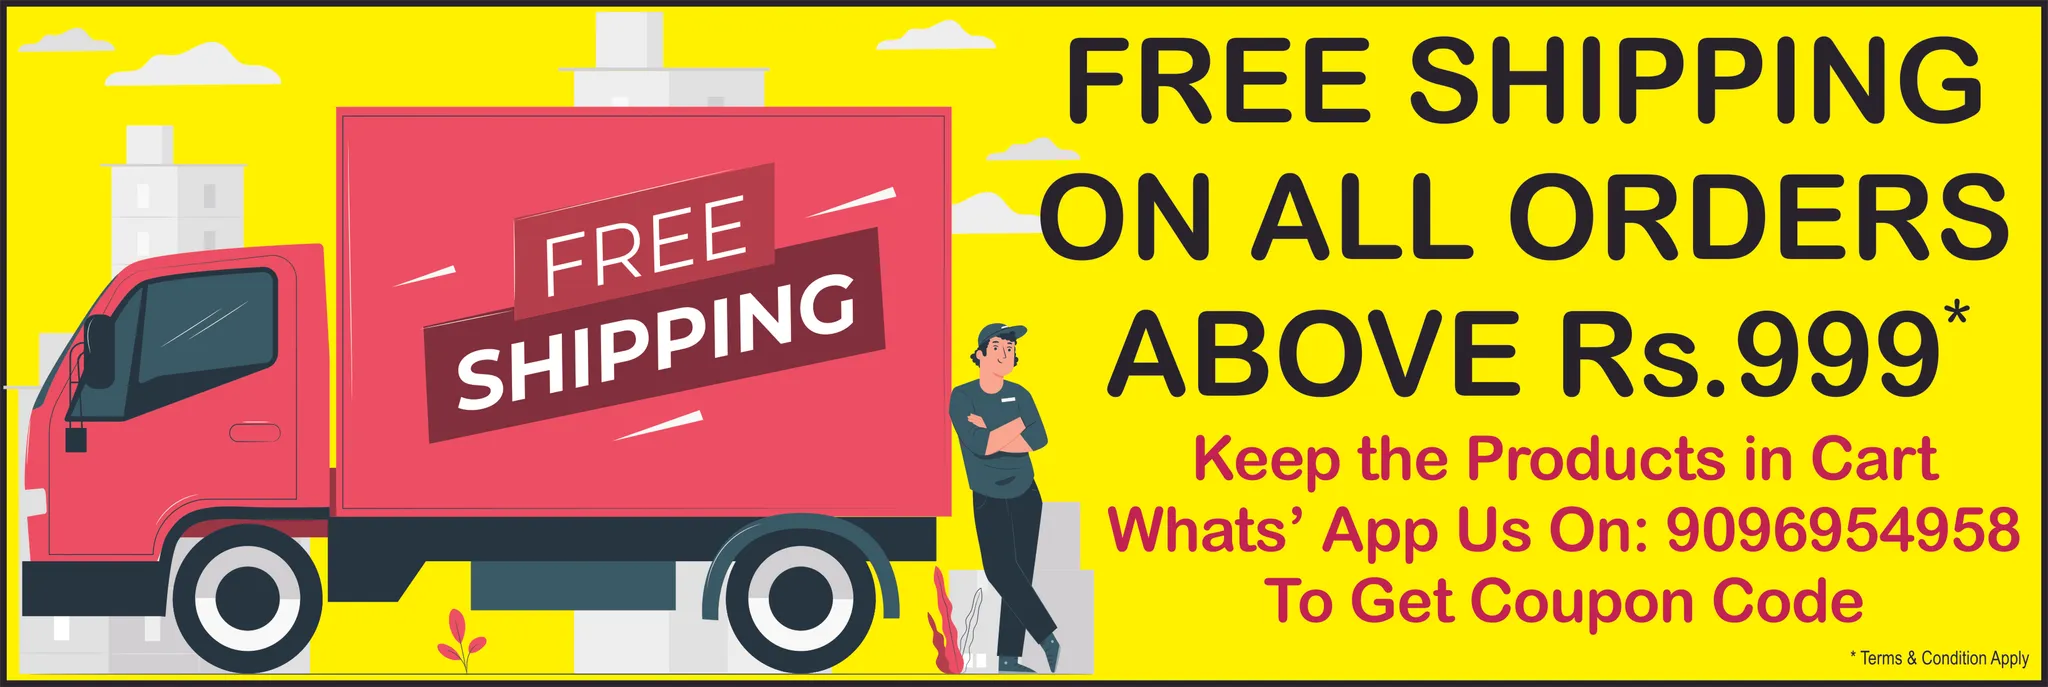 Free Shipping on Rs.999